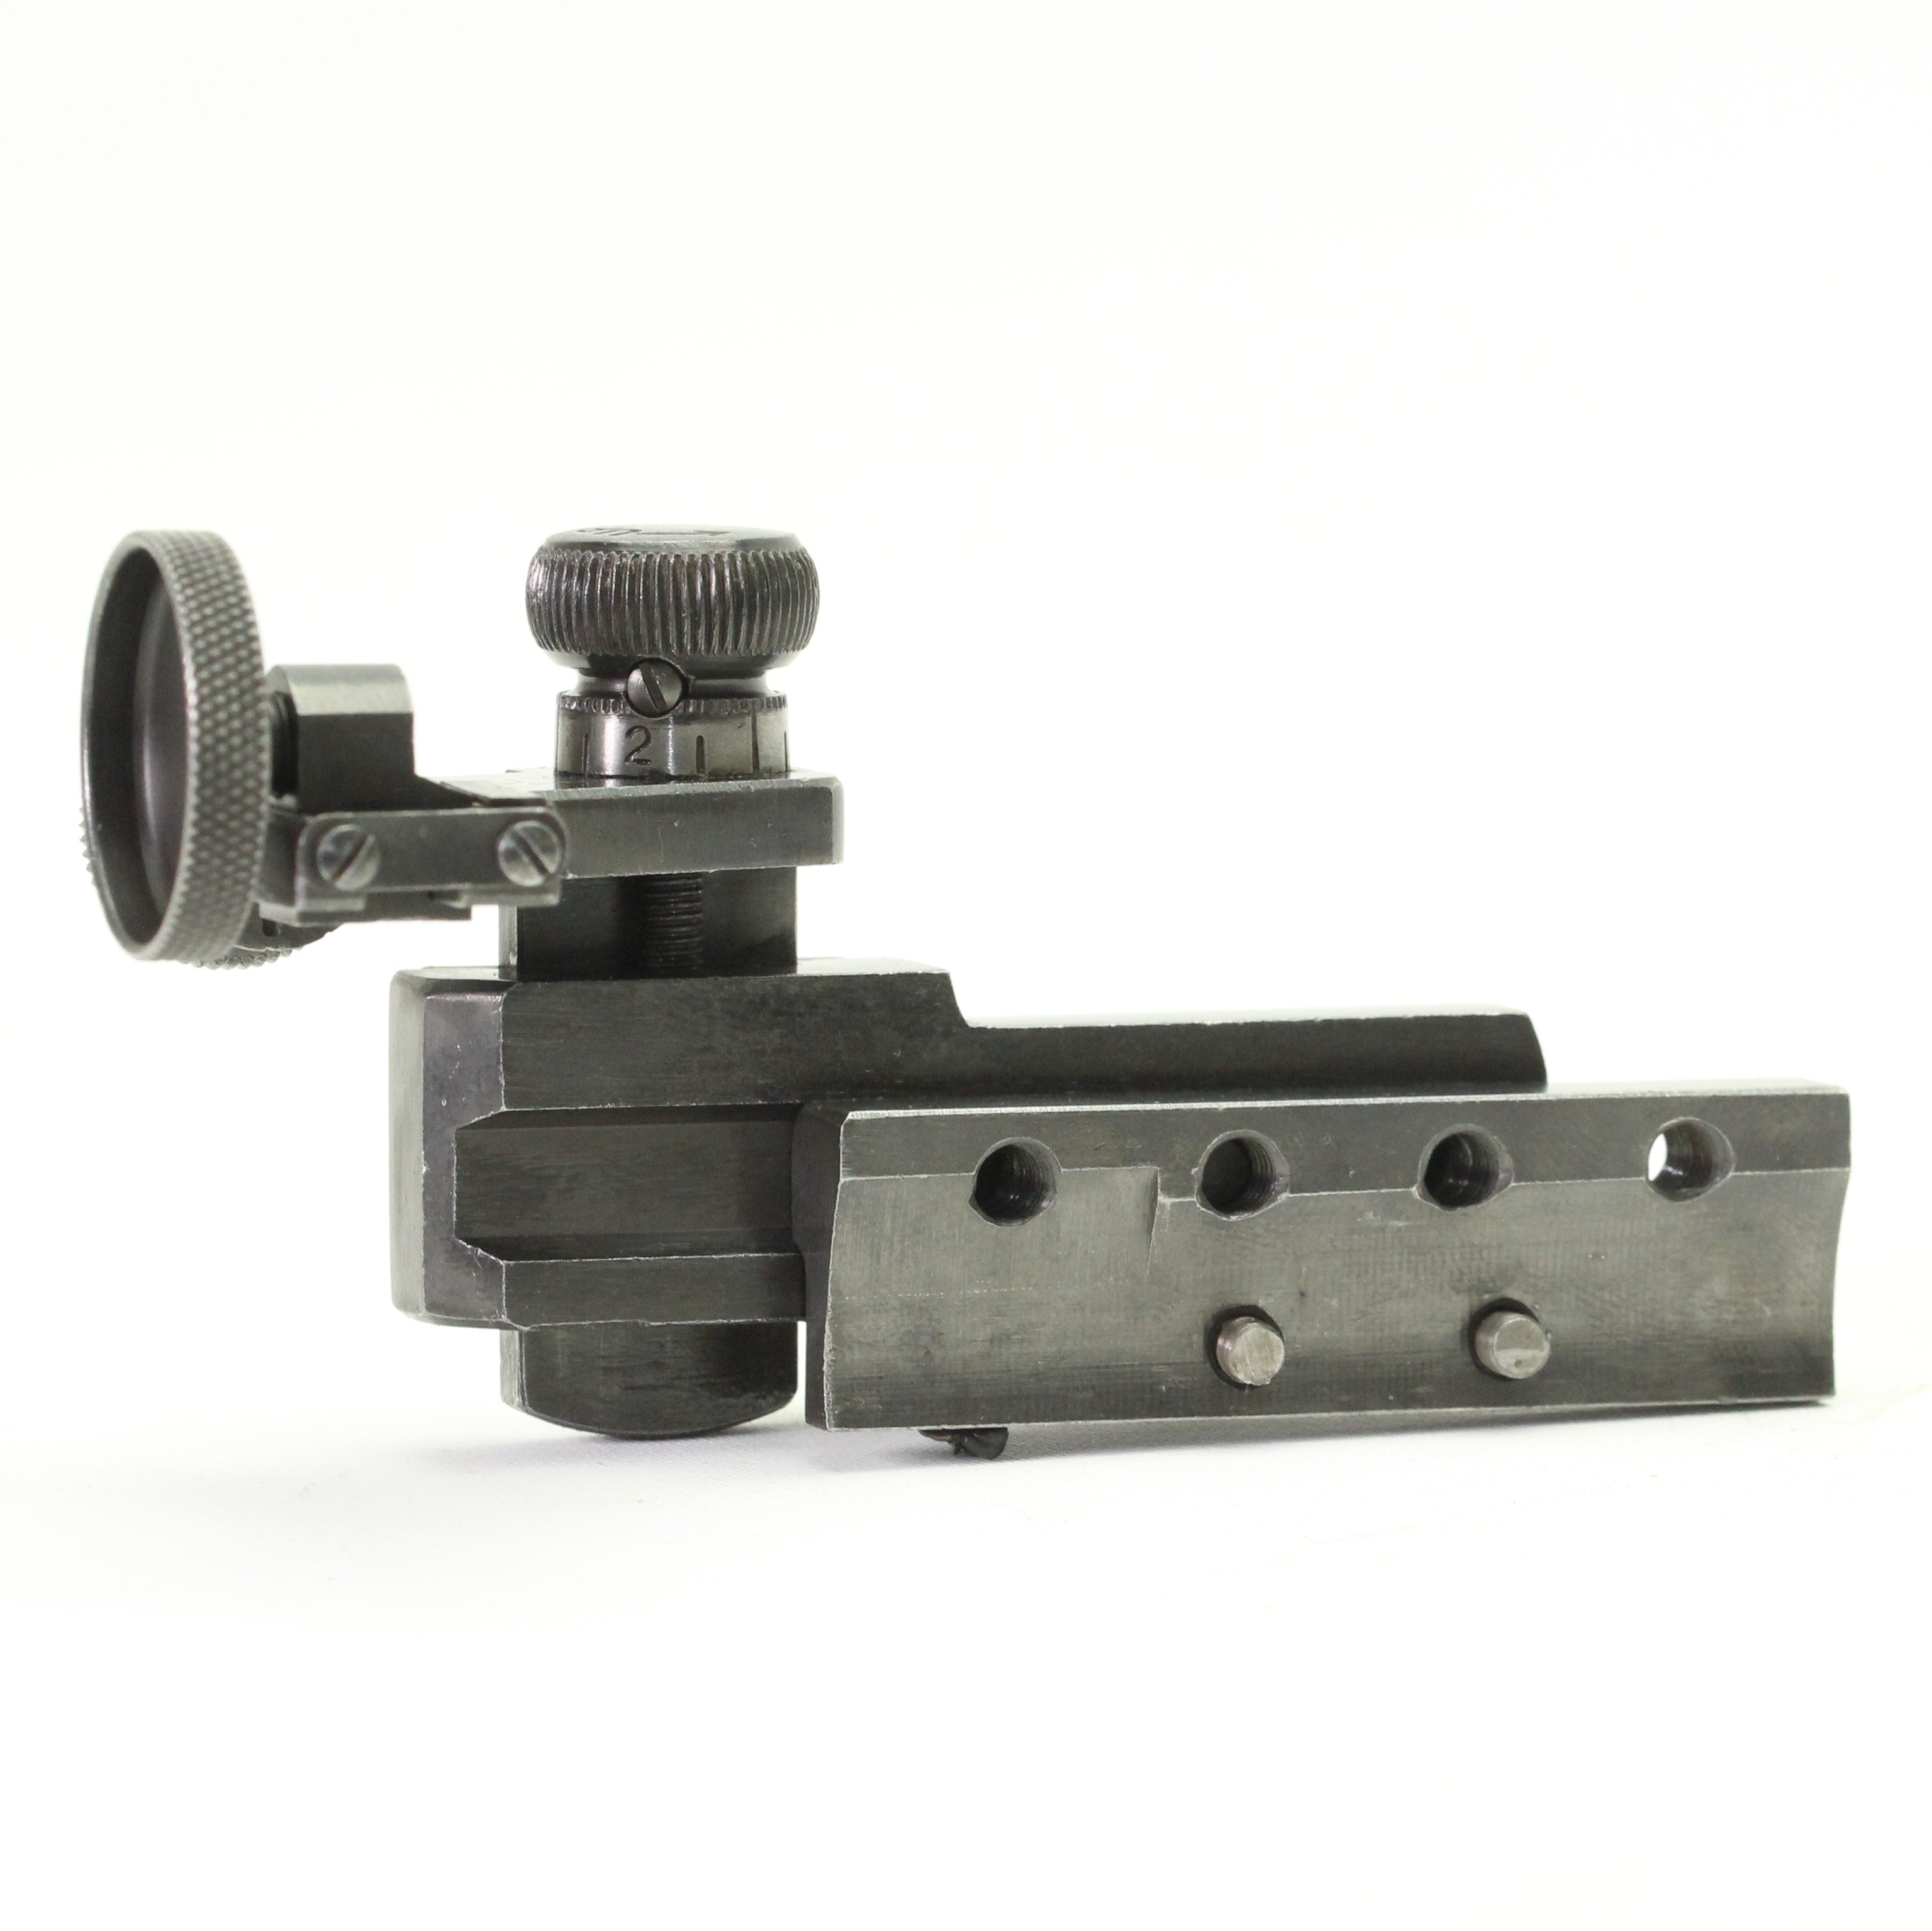 Redfield "OLYMPIC" Target Rifle Receiver Sight